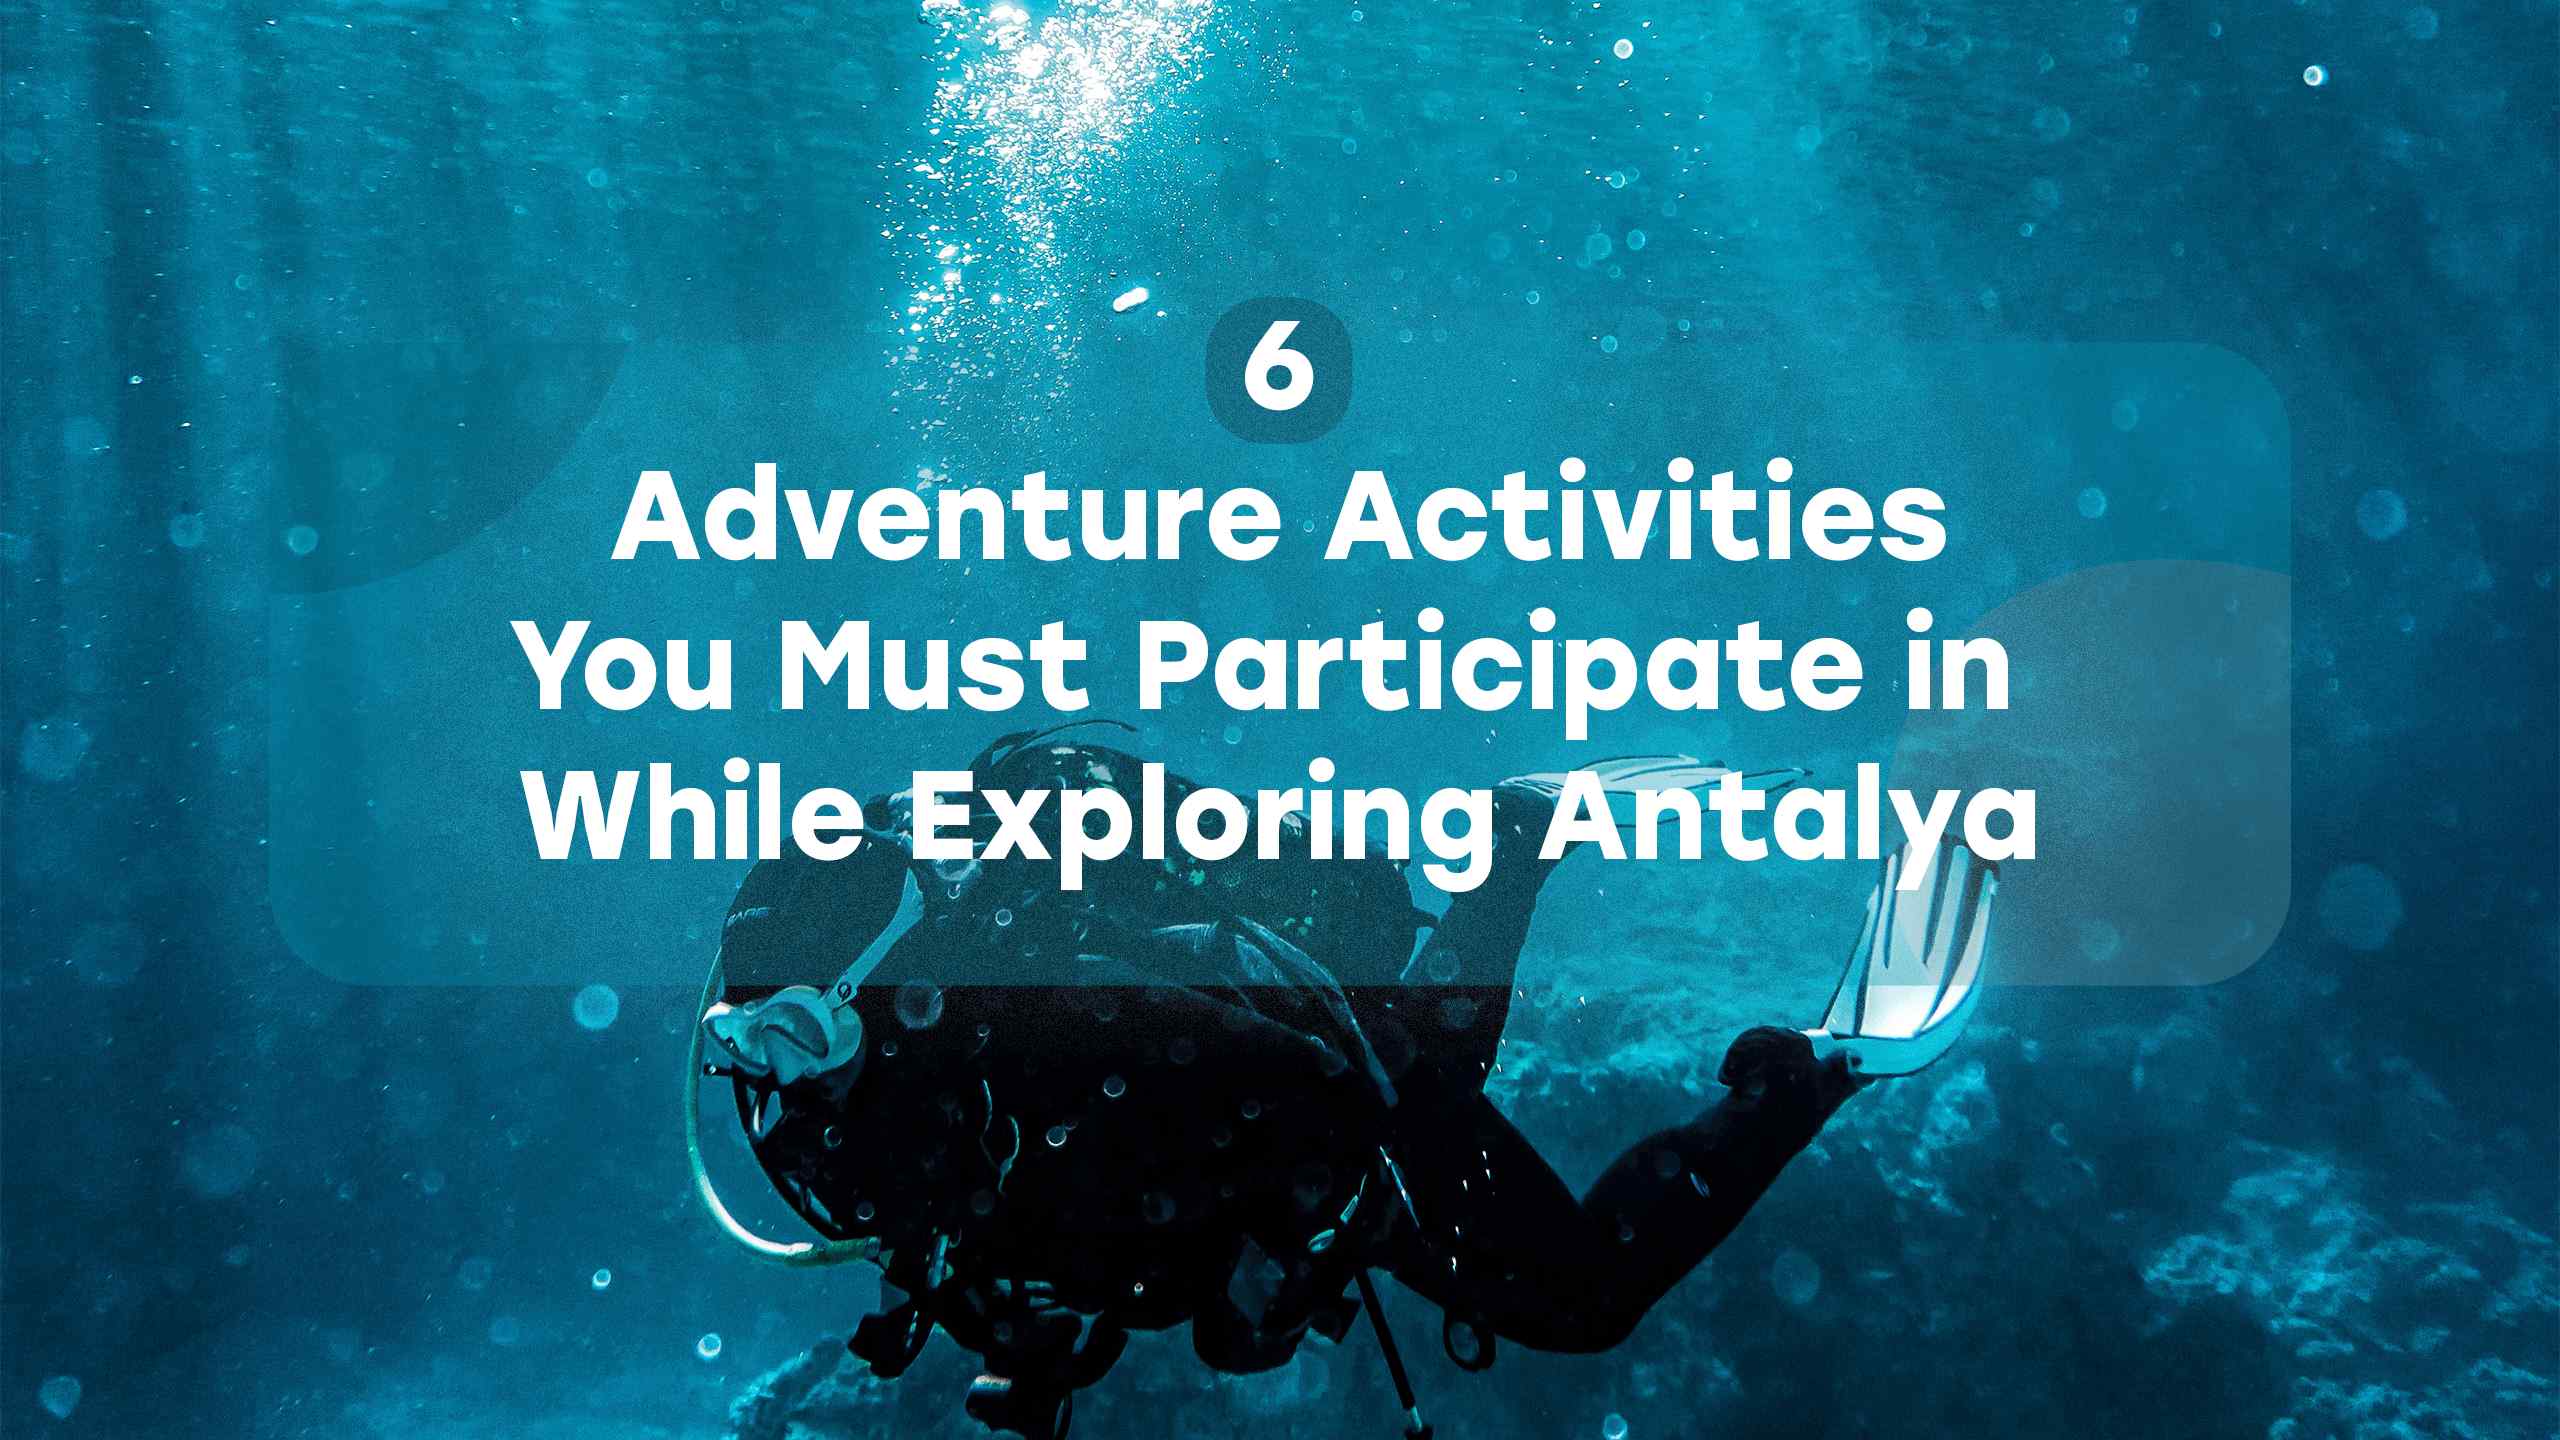 6 Adventure Activities You Must Participate in While Exploring Antalya Everytours Travel Antalya